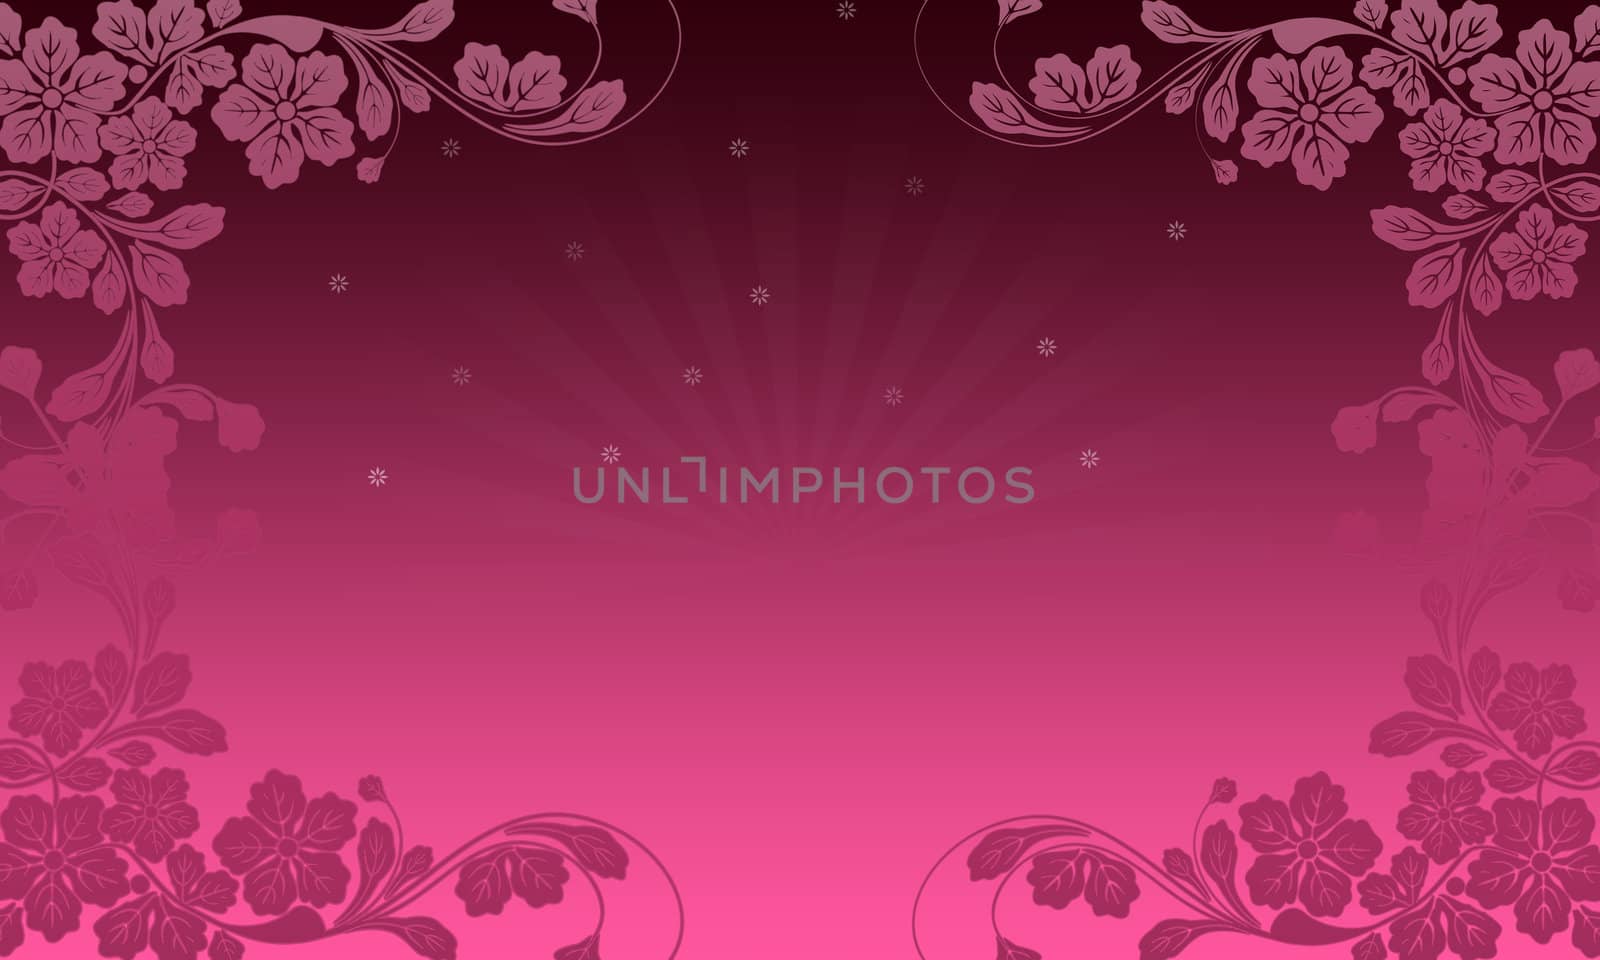 High resolution pink wallpaper with floral elements. 